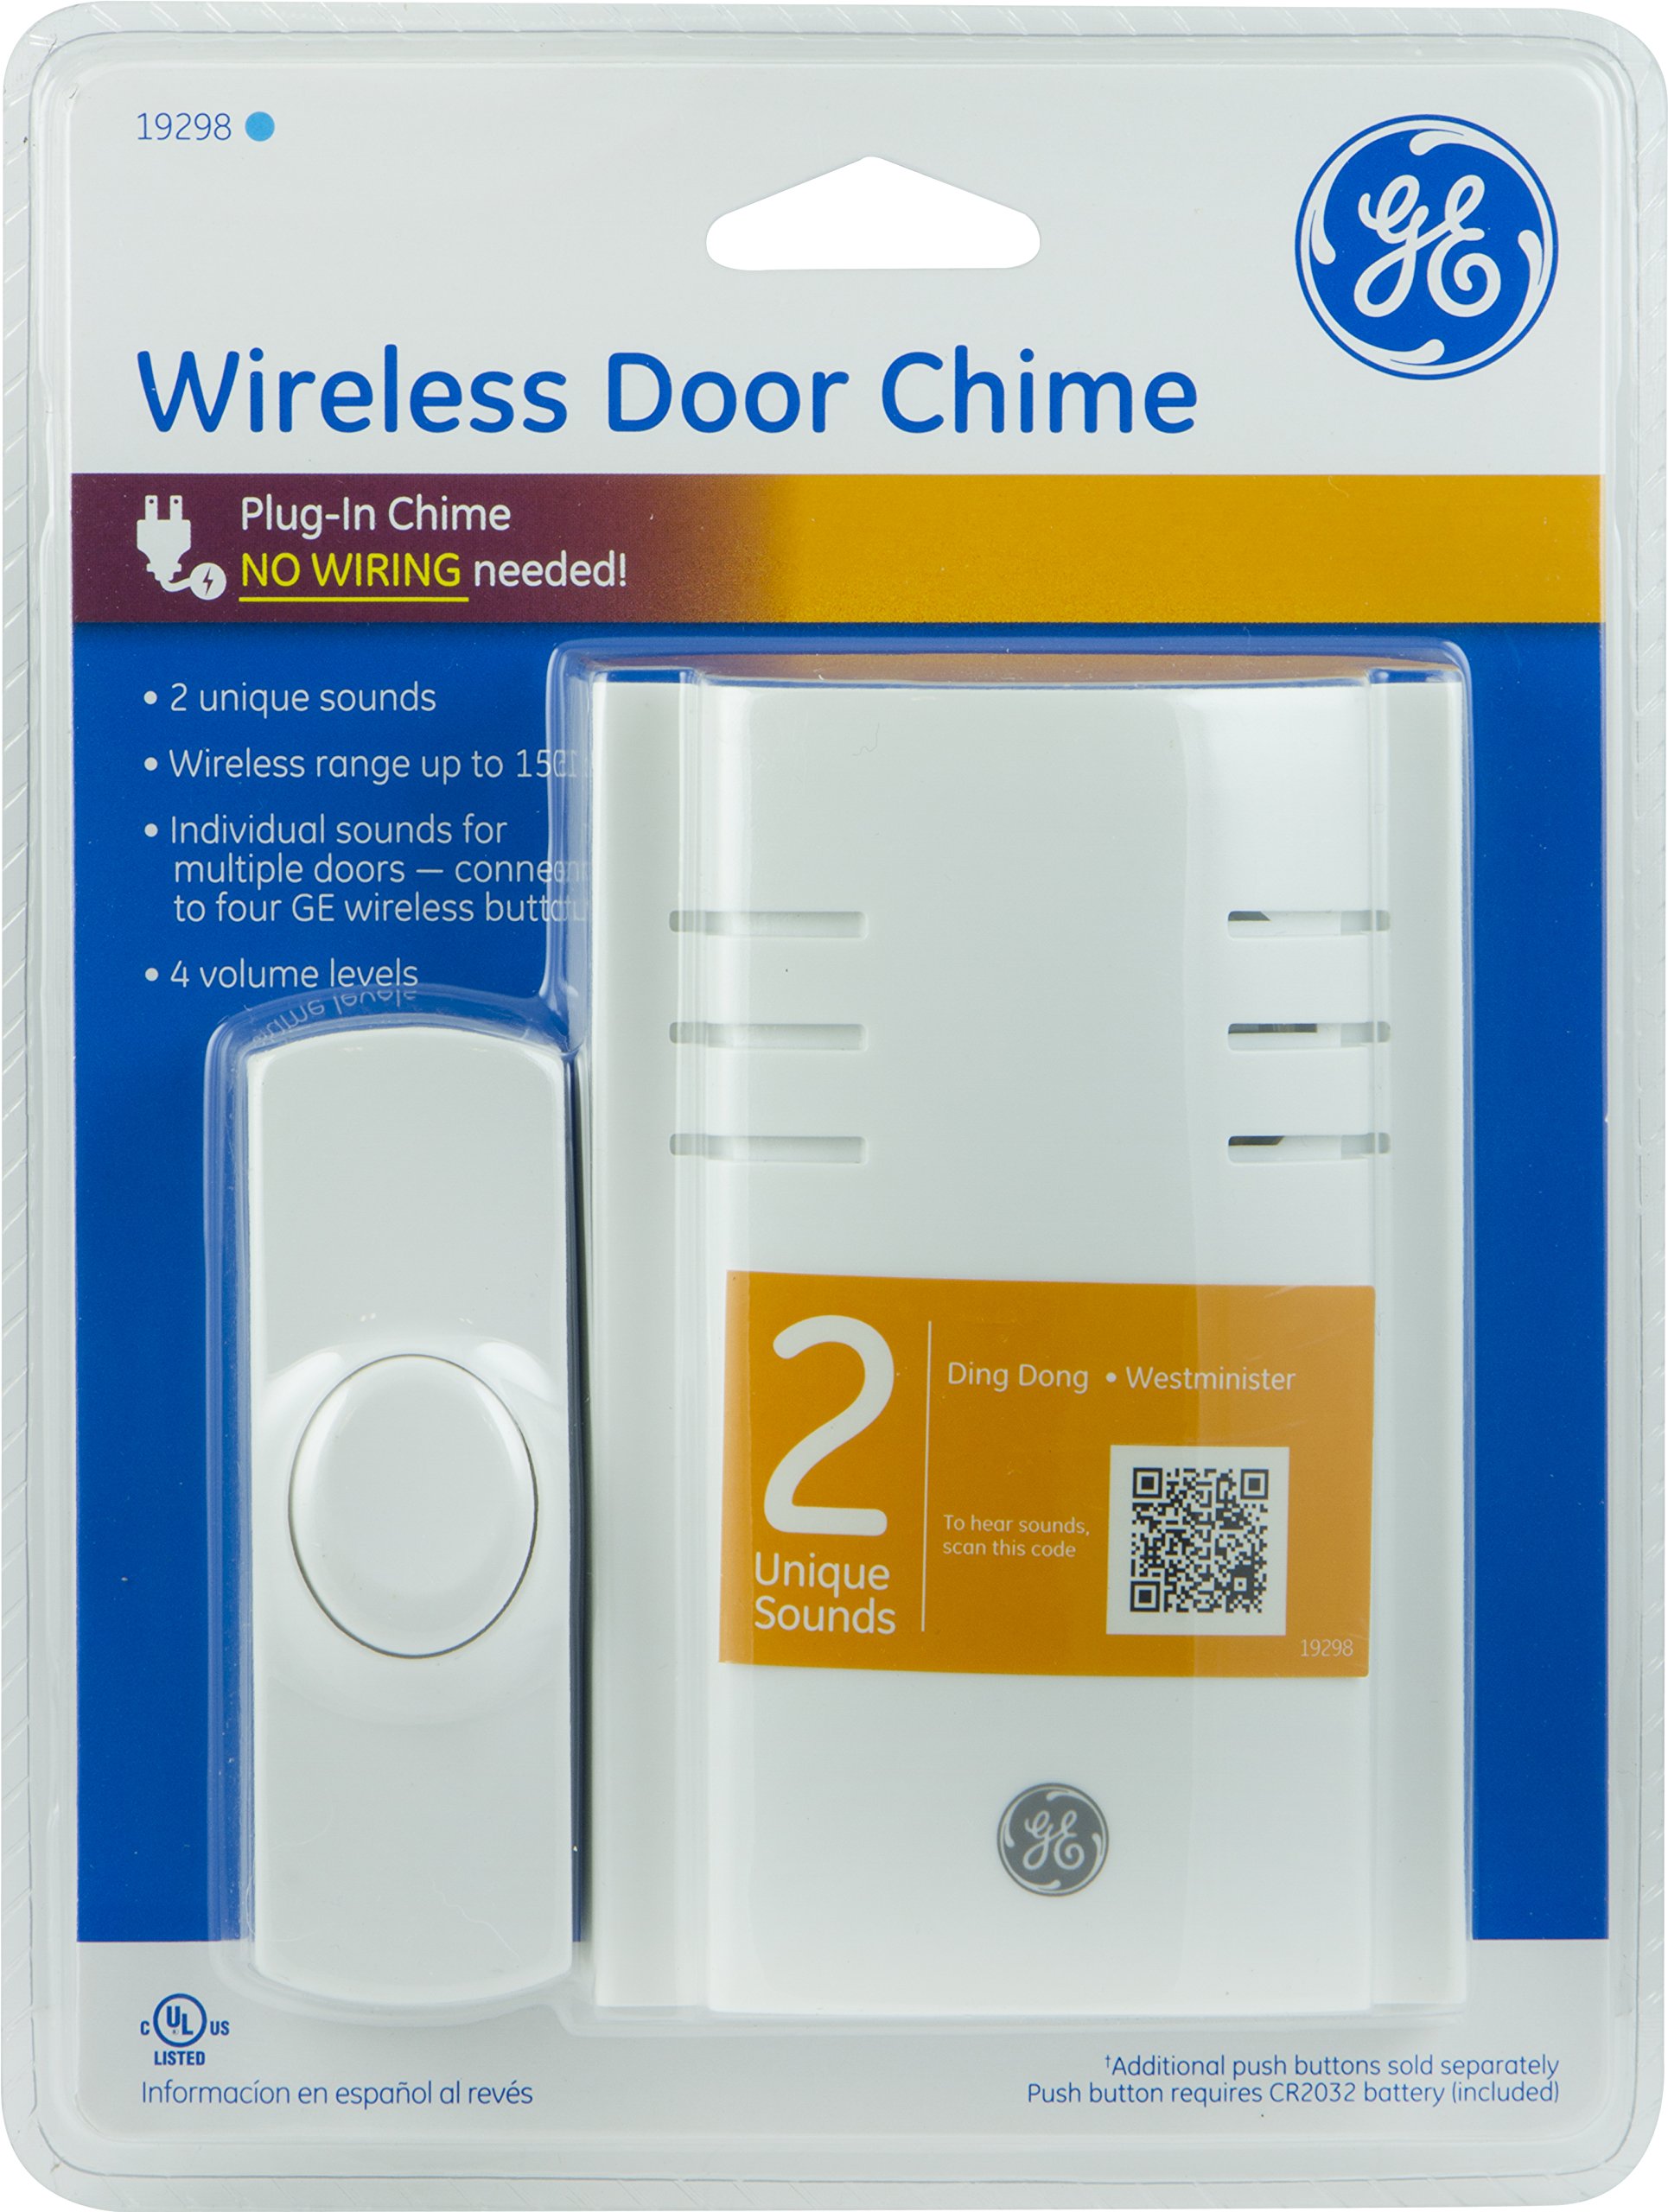 GE Wireless Plug-In Door Chime with One Push Button (2 Pack), 19298